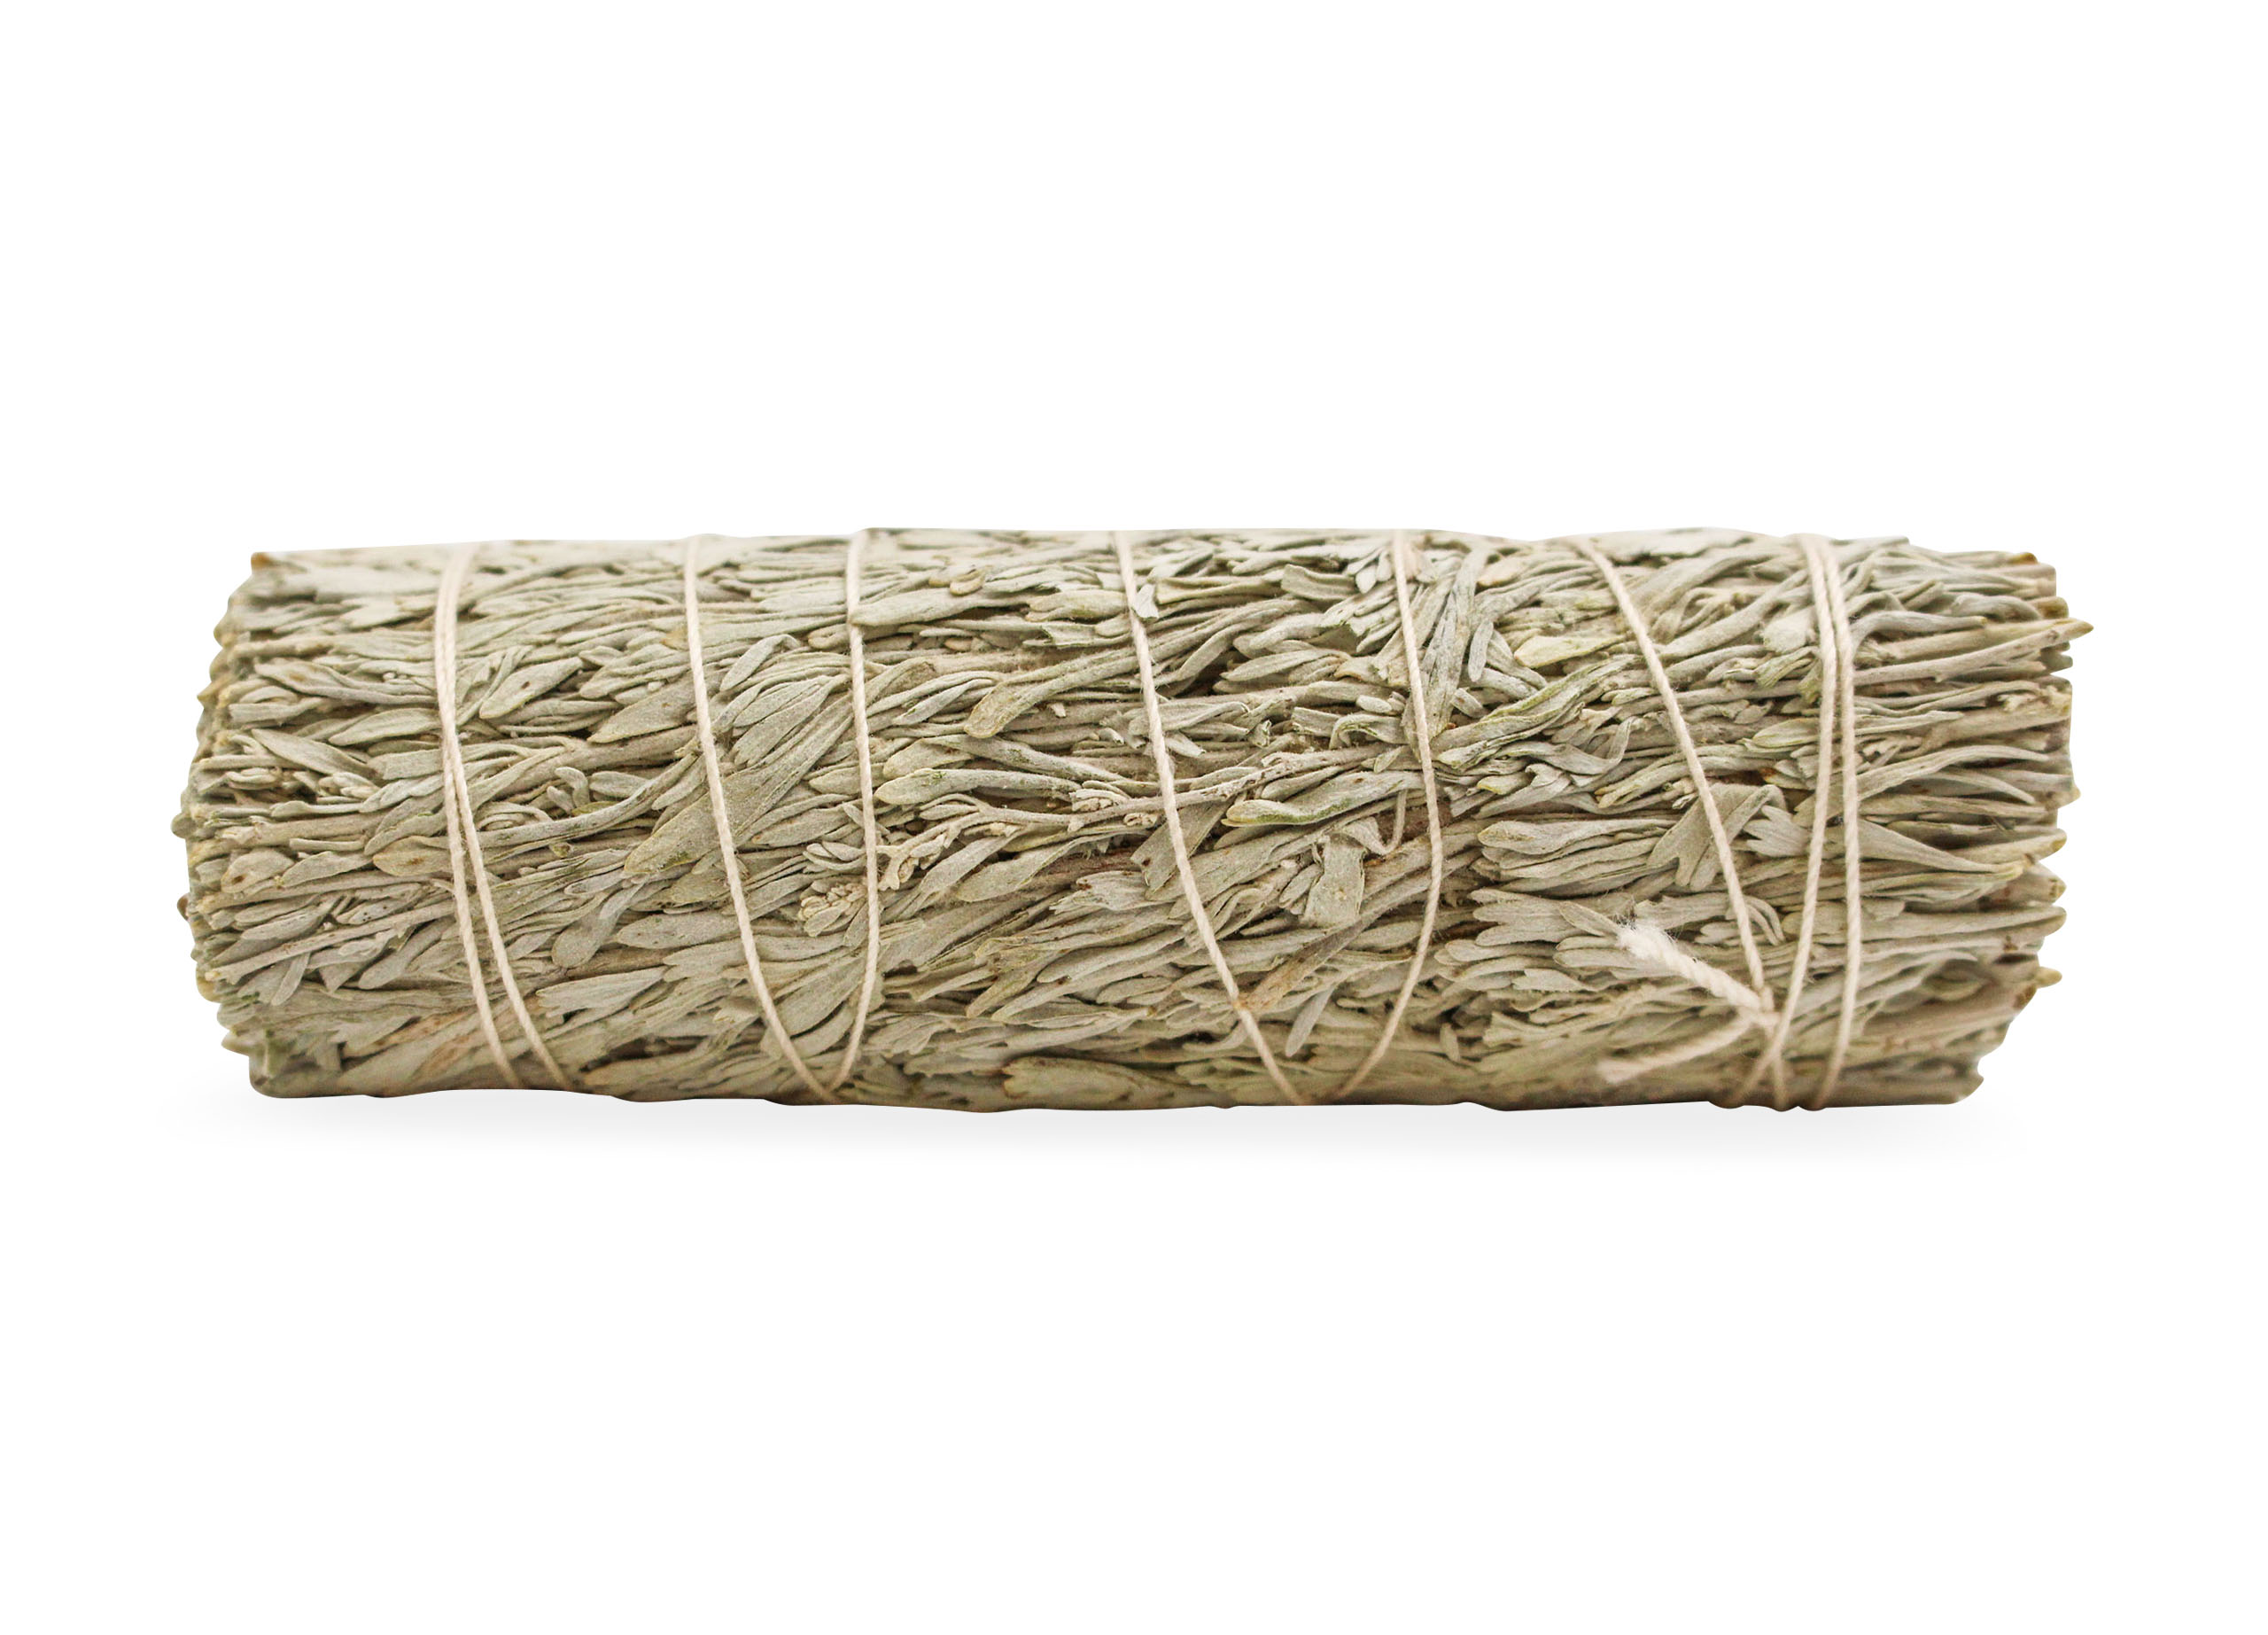 Mountain Sage Smudging stick _ Frankincense Resin - Crystal Dreams